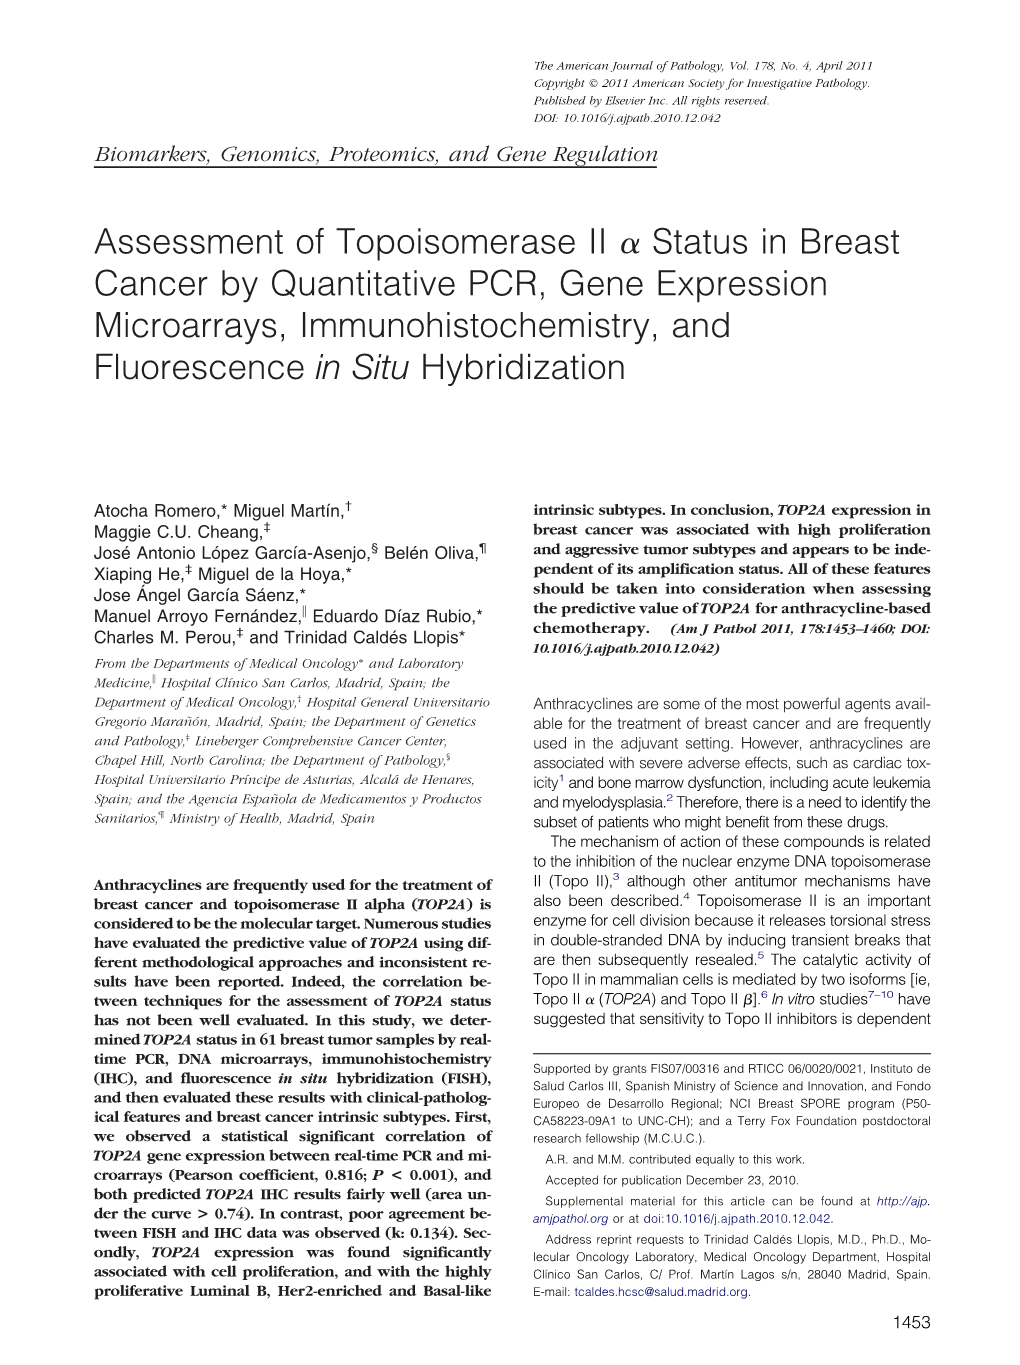 Assessment of Topoisomerase II Α Status in Breast Cancer By